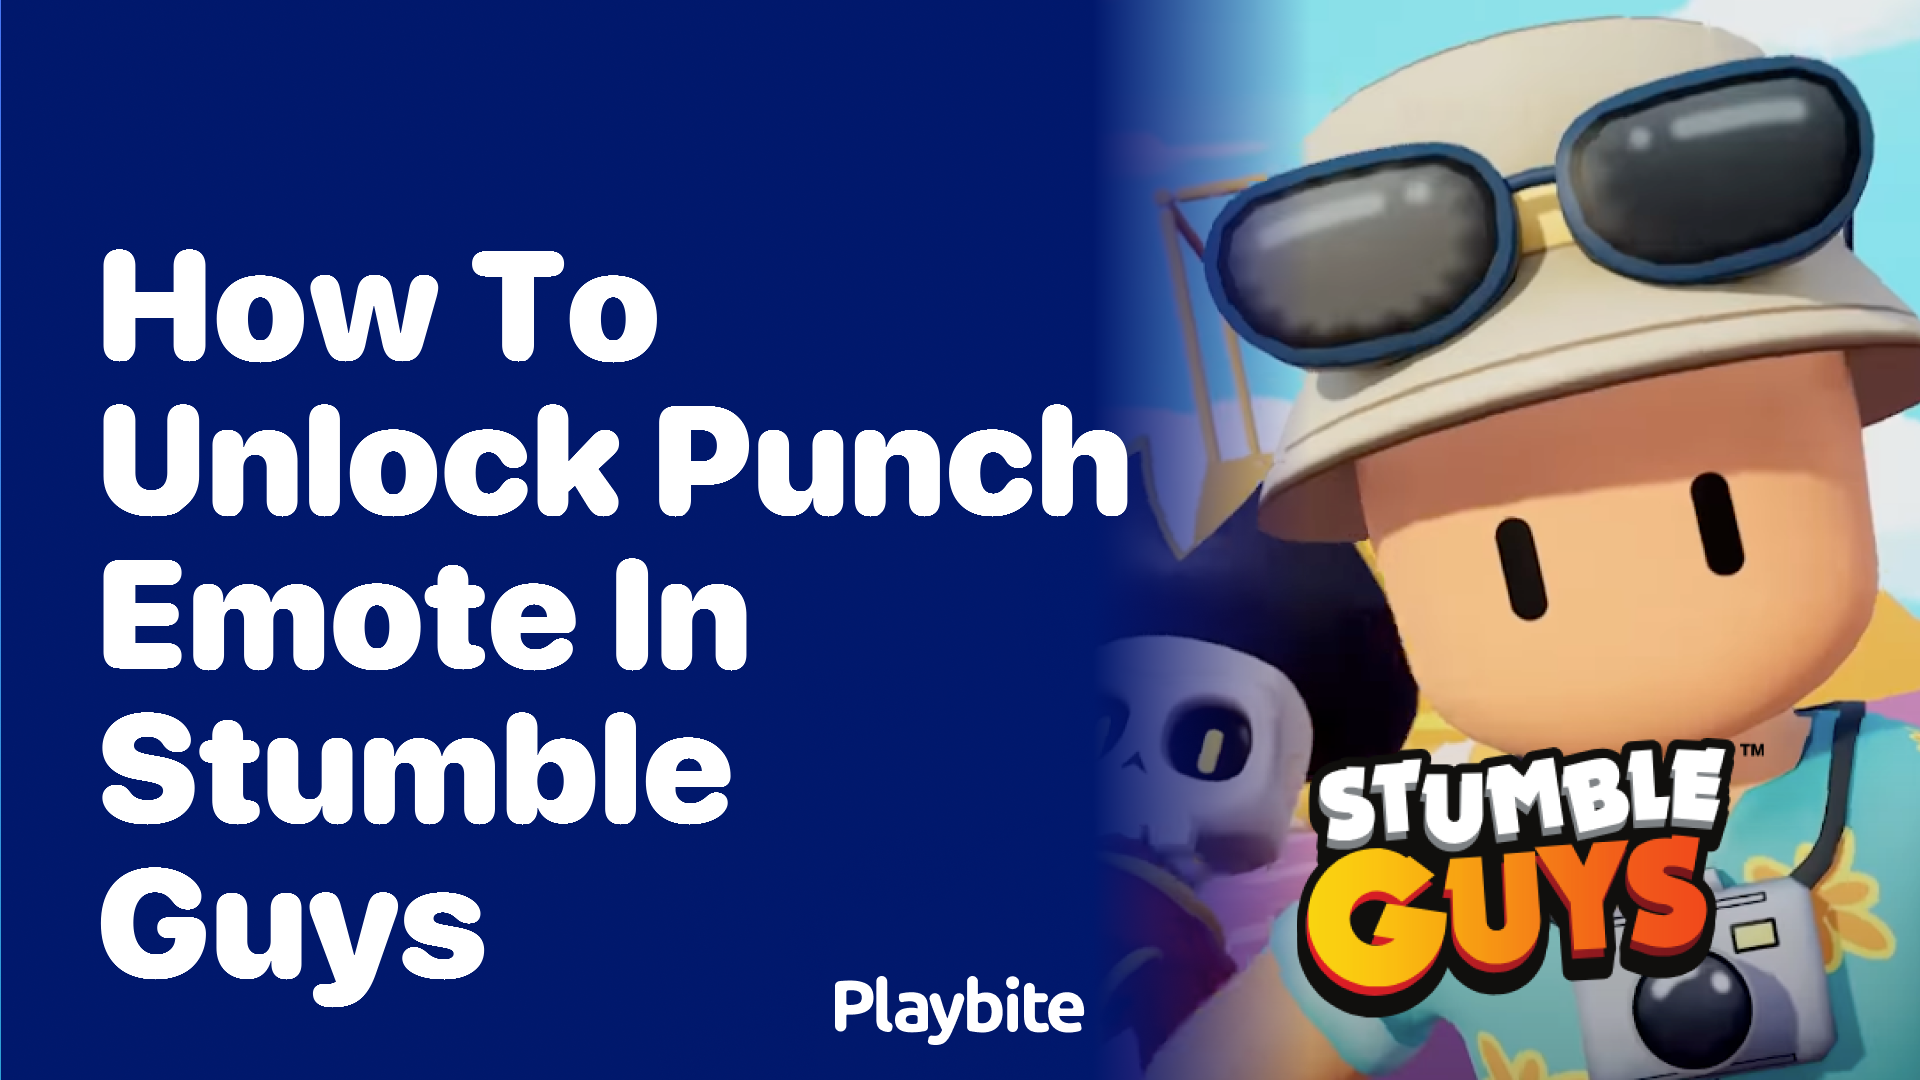 How to Unlock the Punch Emote in Stumble Guys